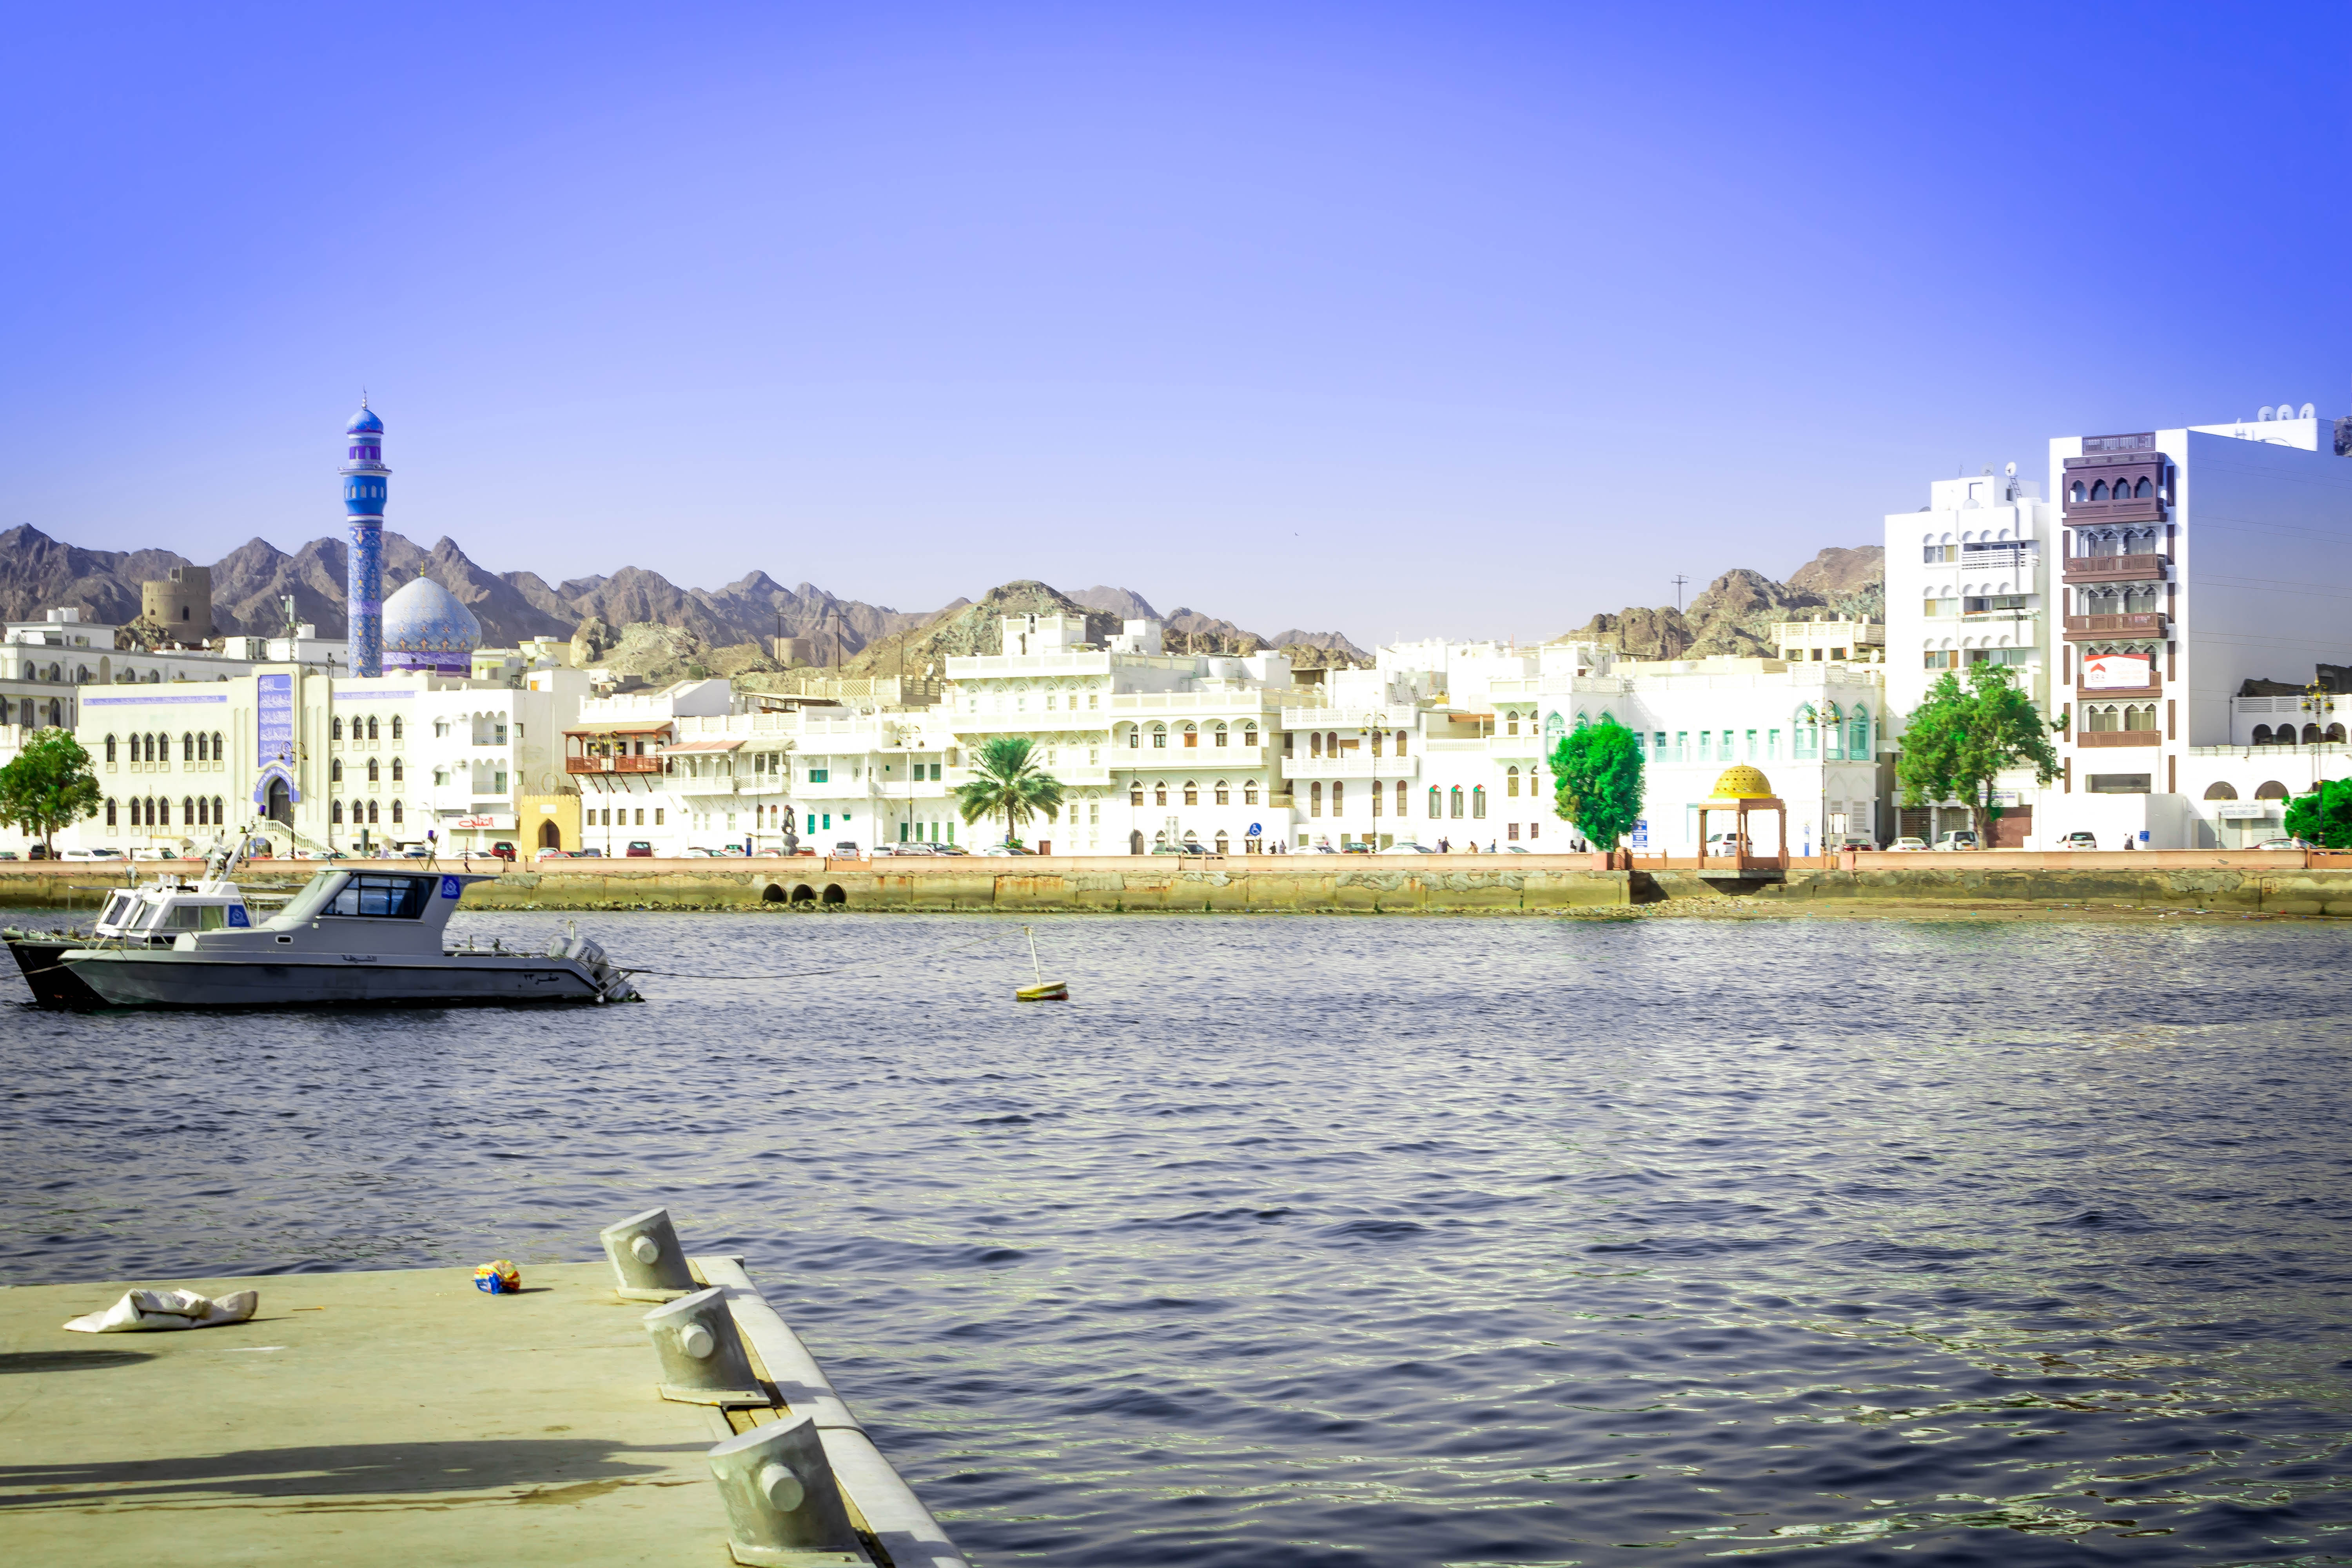 Oman as seen by a budding photographer